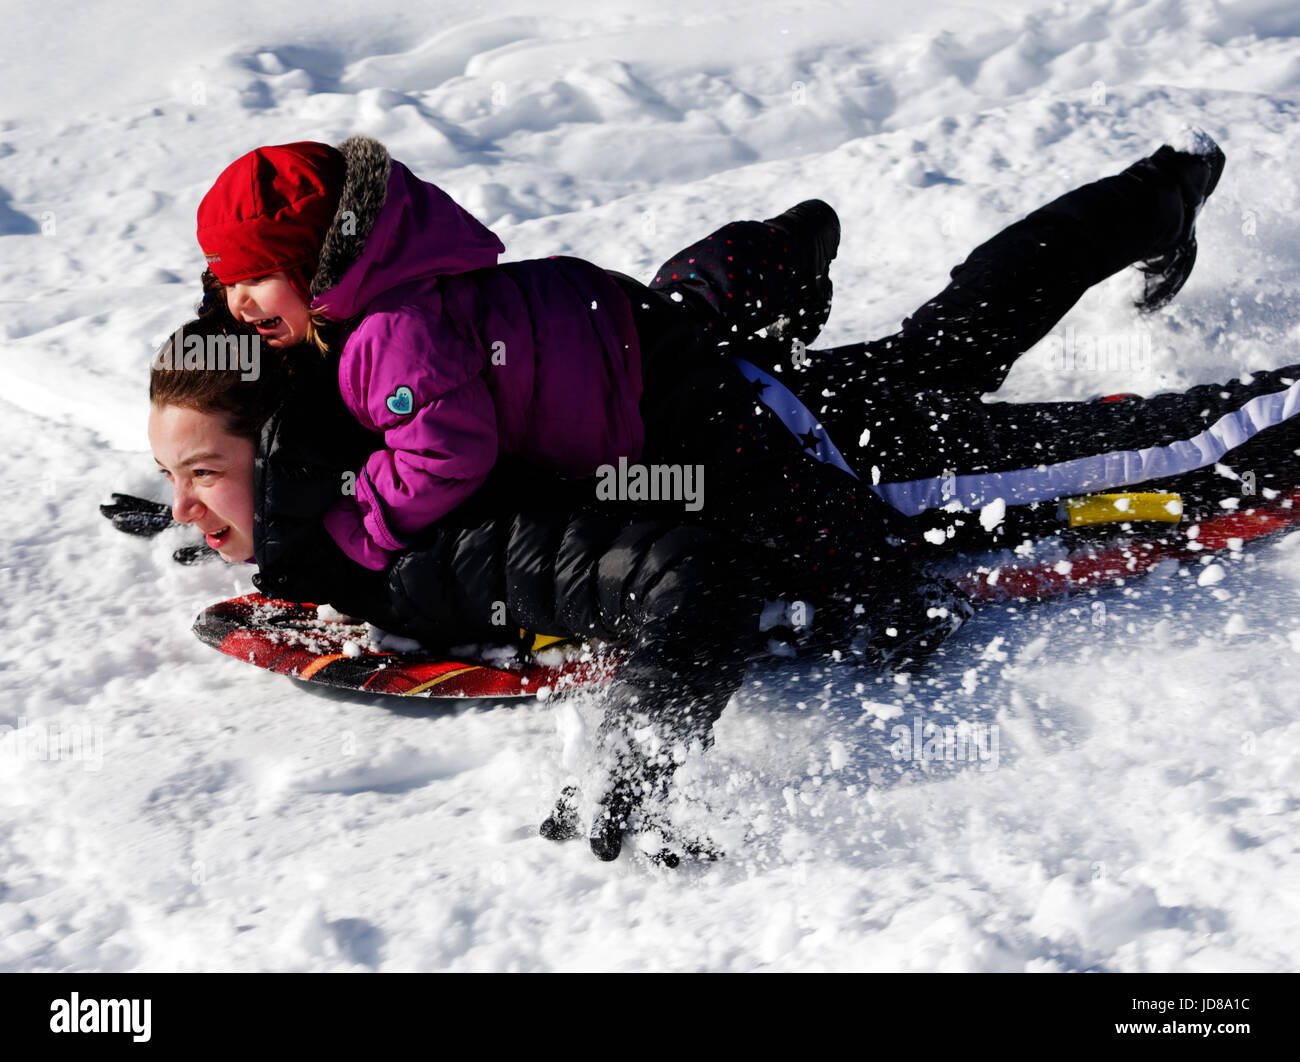 A young child riding on the back of an adult on a sledge Stock Photo